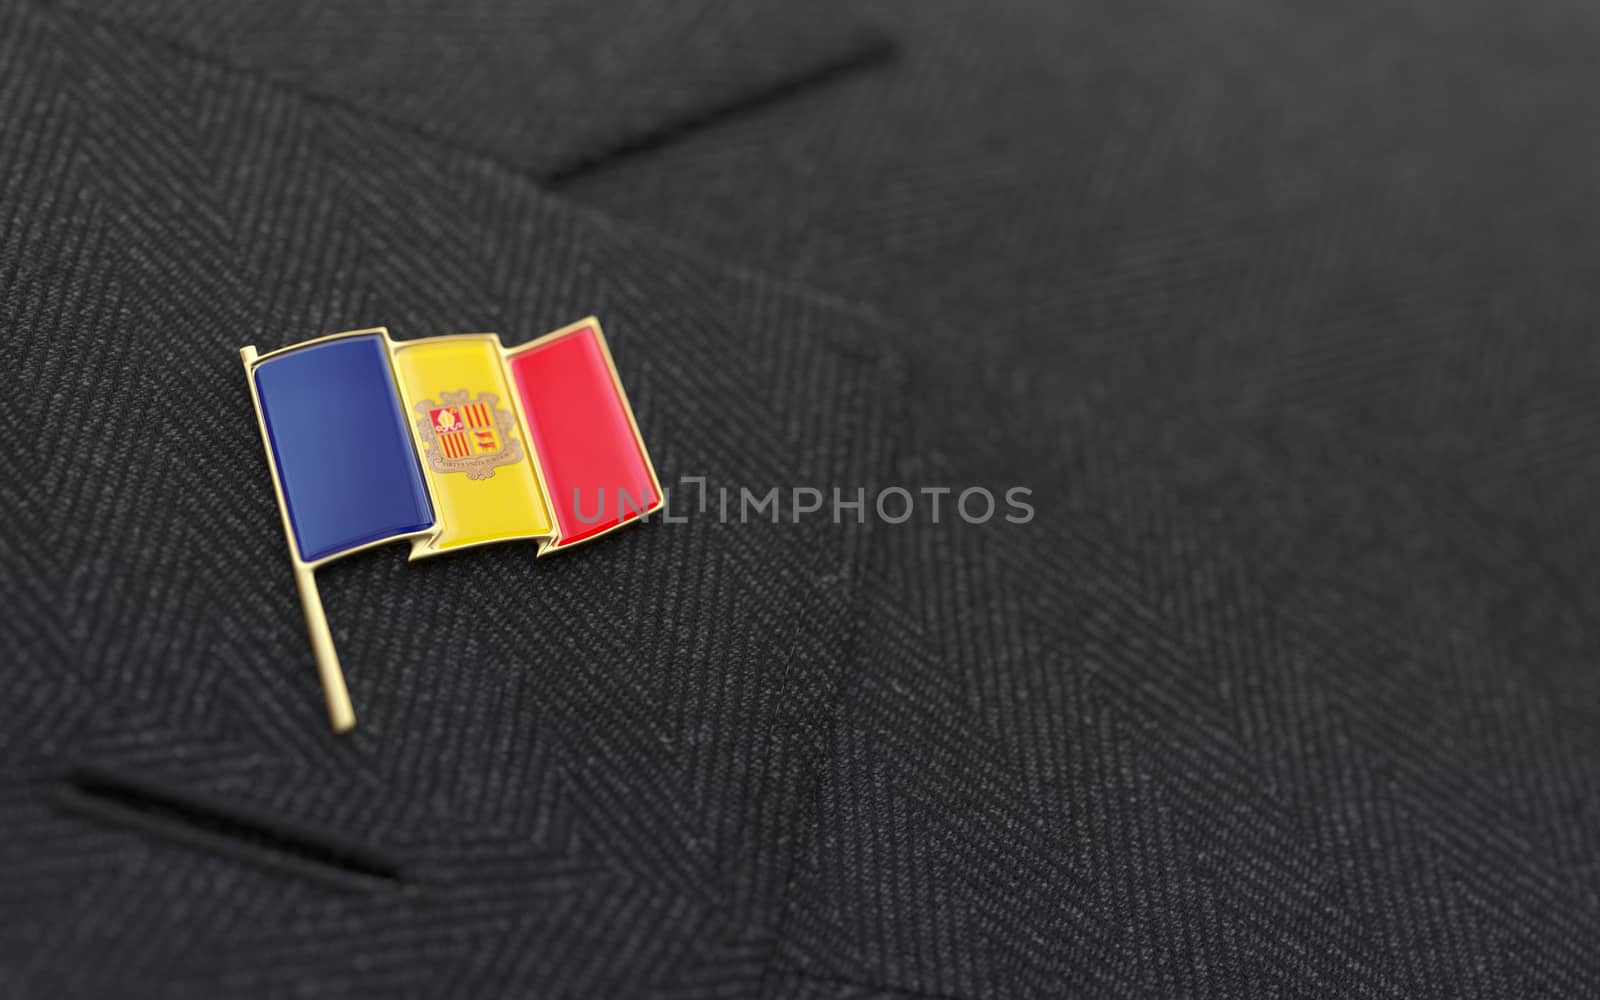 Andorra flag lapel pin on the collar of a business suit jacket shows patriotism